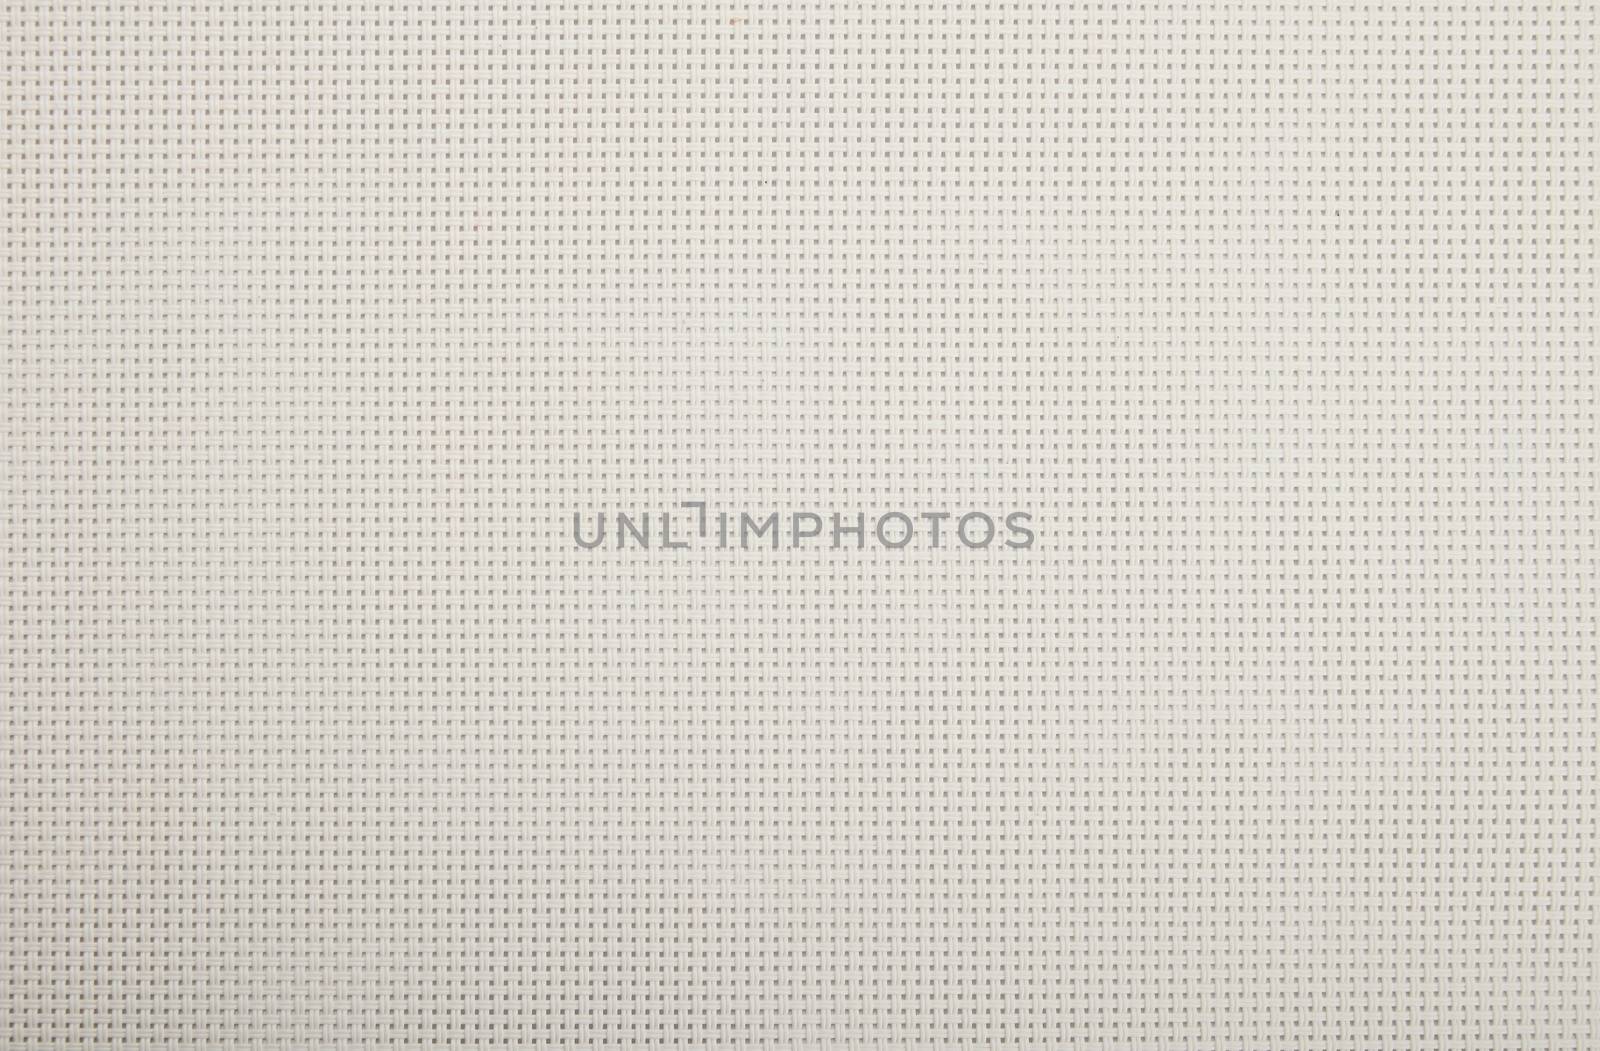 Background texture of white wicker braided plastic double strings with small mesh